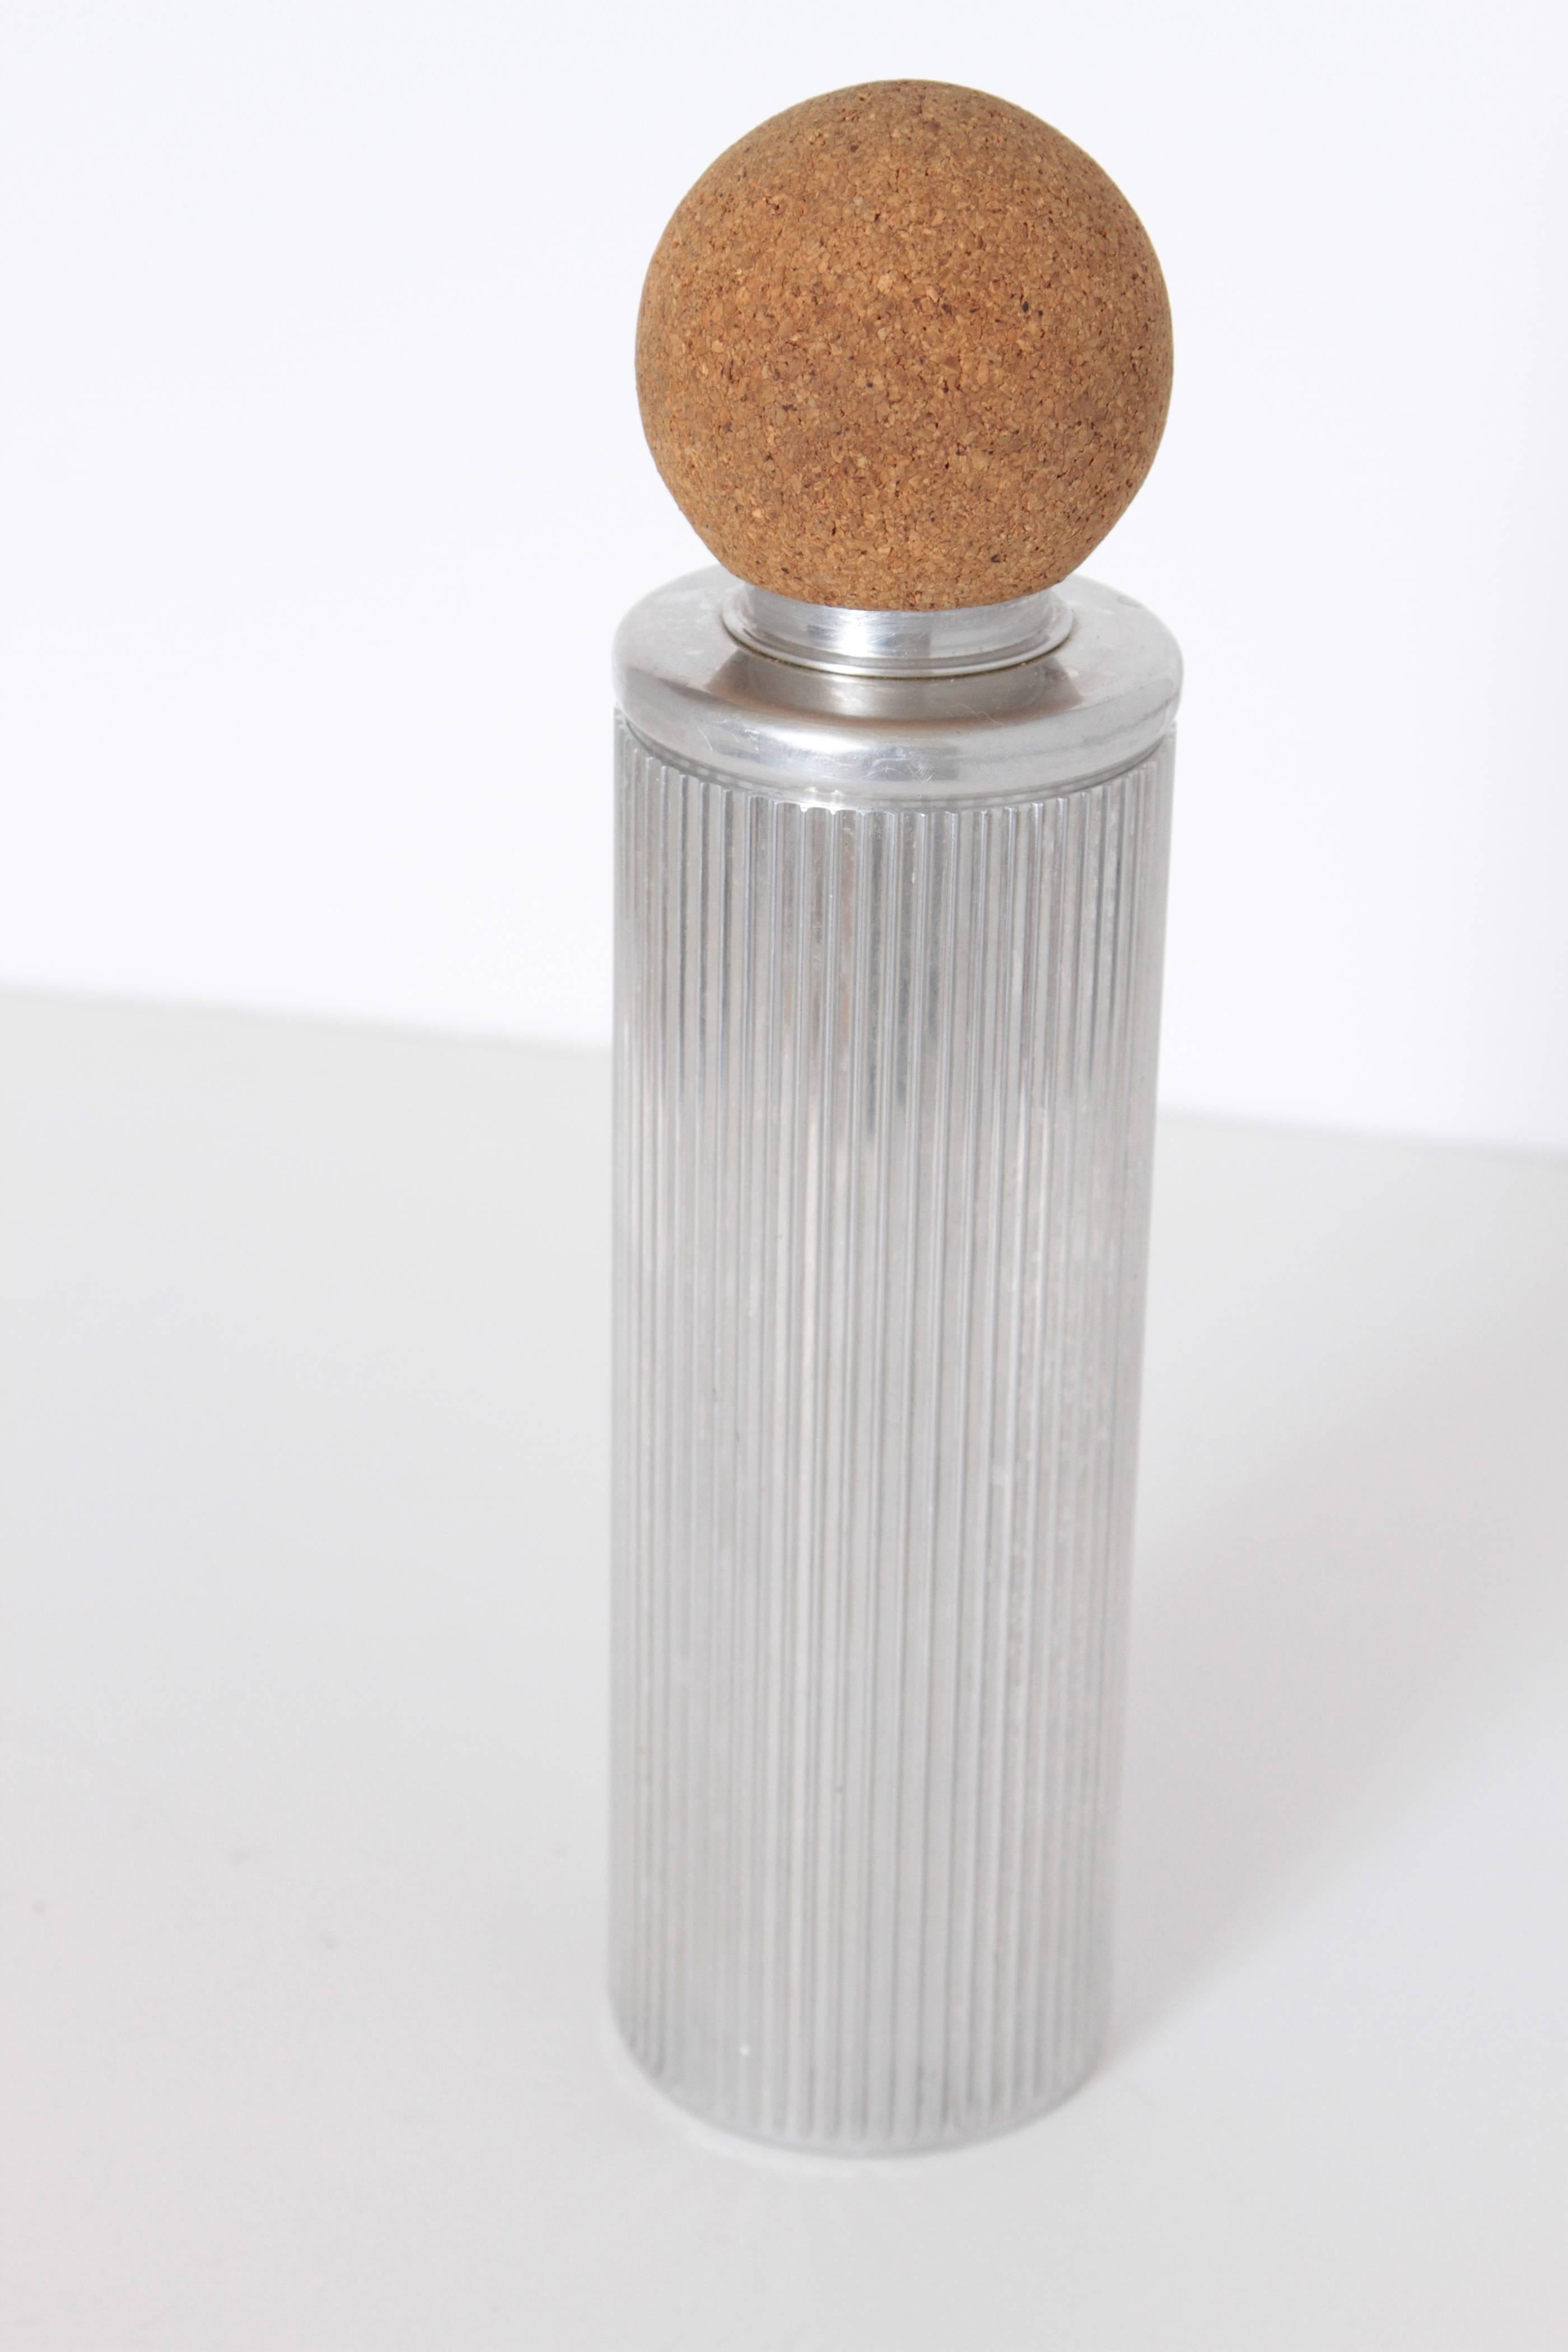 Machine Age Art Deco ribbed cocktail shaker, machined aluminum and cork, after Russel Wright

Rare 12.5